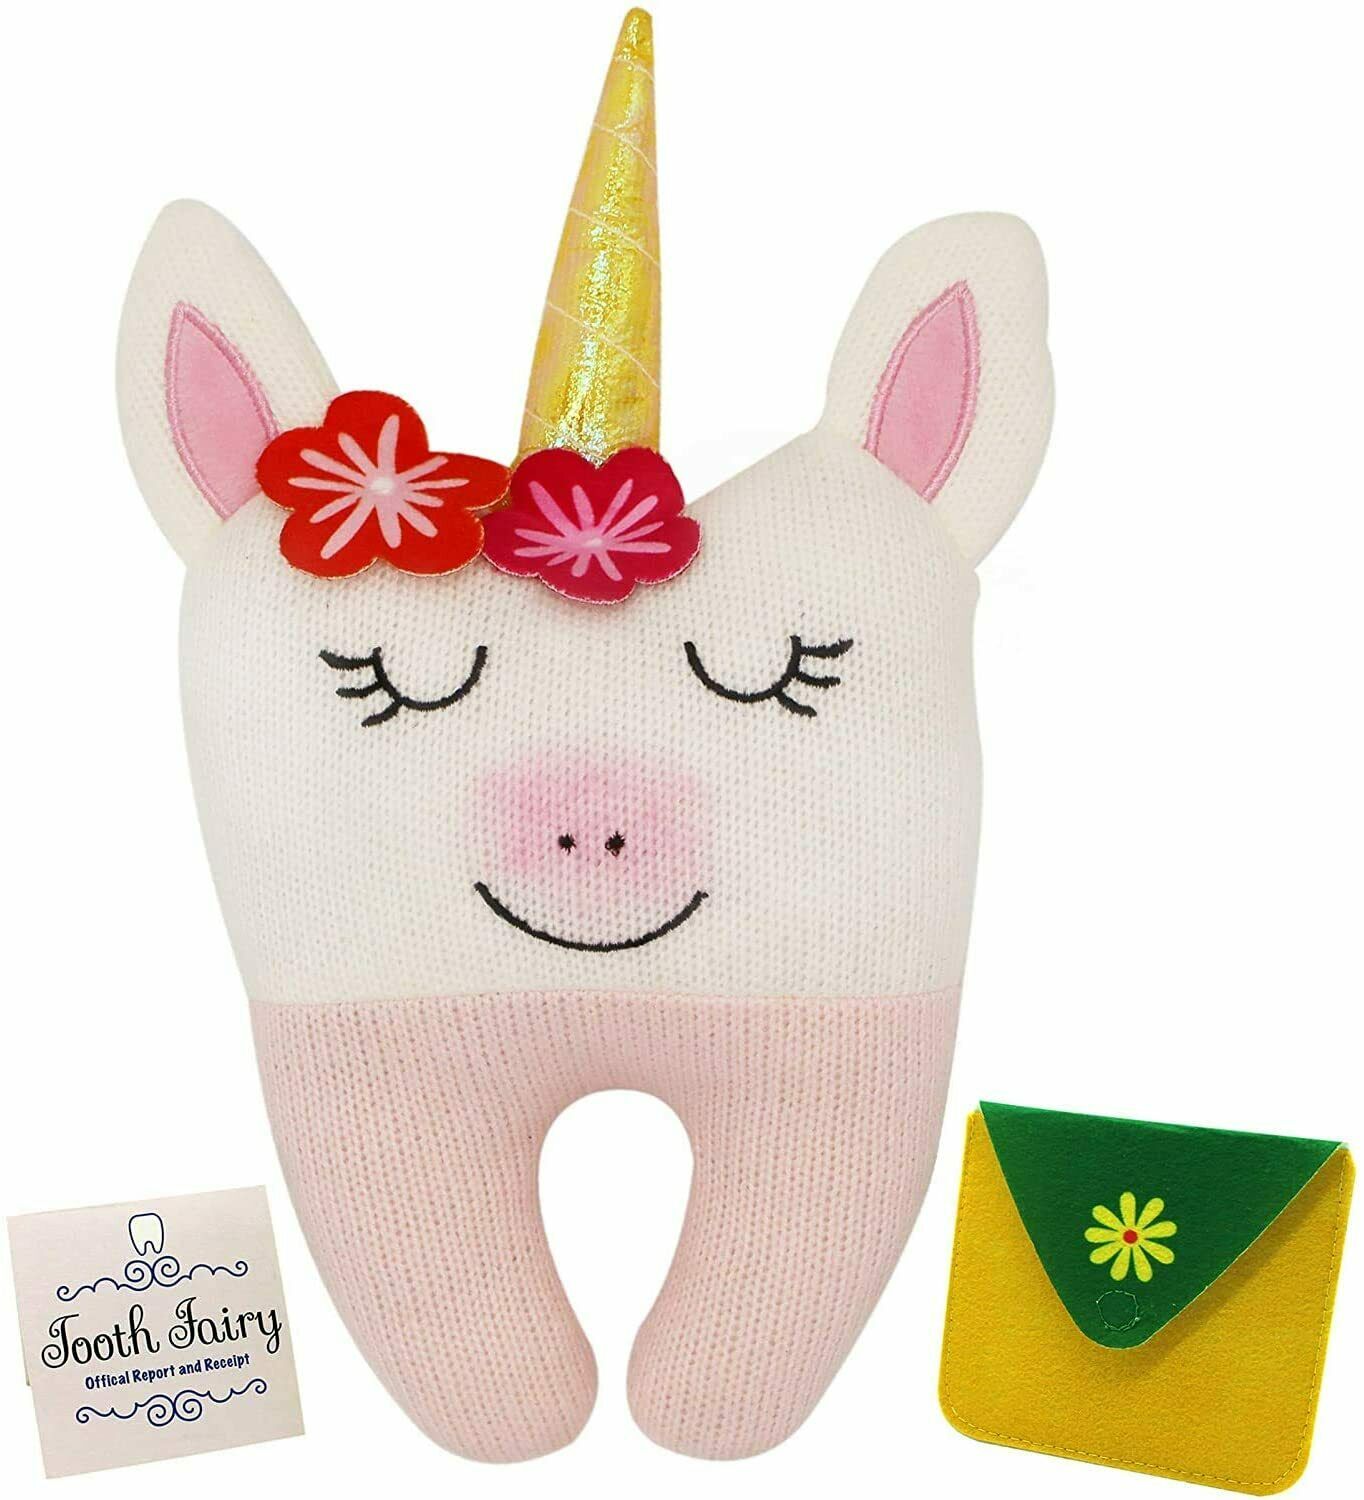 Tooth Fairy Pillow For Girls - Unicorn Themed Keepsake Pillow Set With Notecard